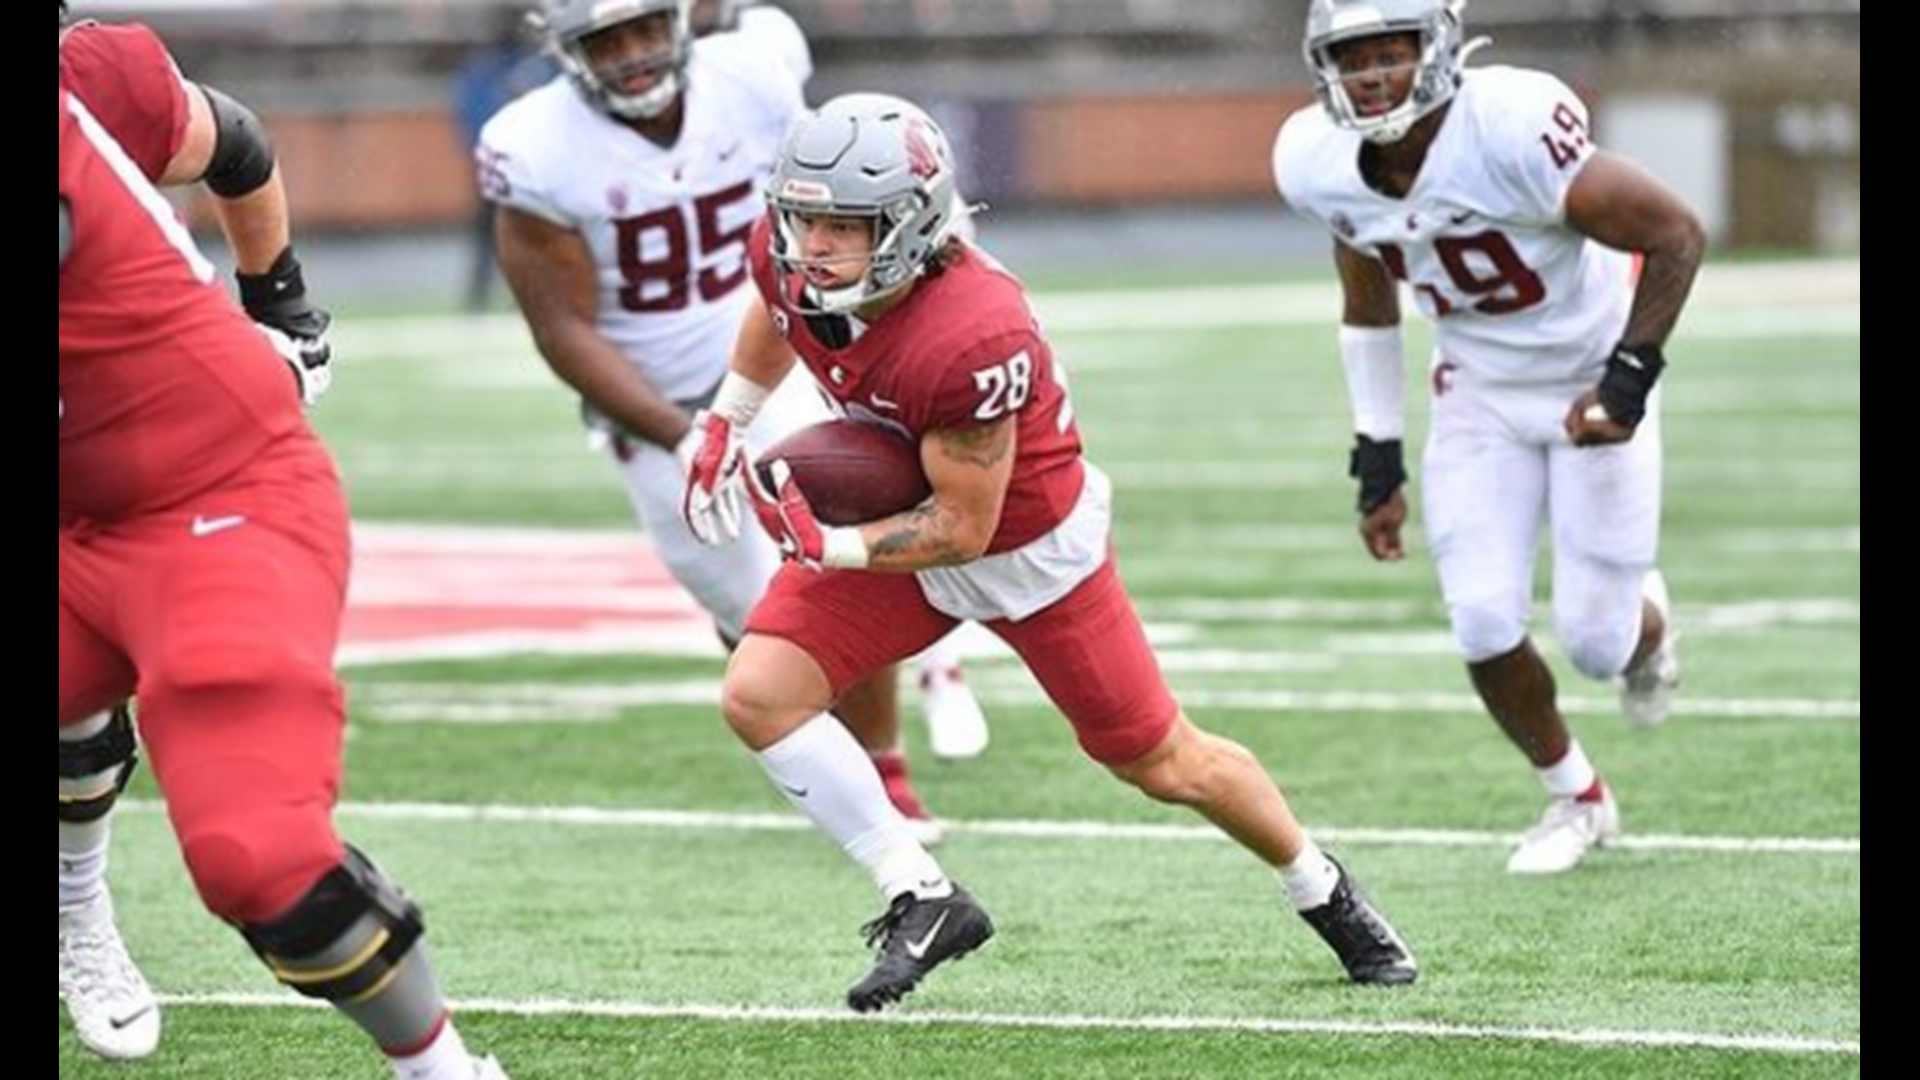 The former Mt. Spokane running back is a walk-on for the Cougs. He's been through a lot in the last year after his mom died in an ATV accident last August.